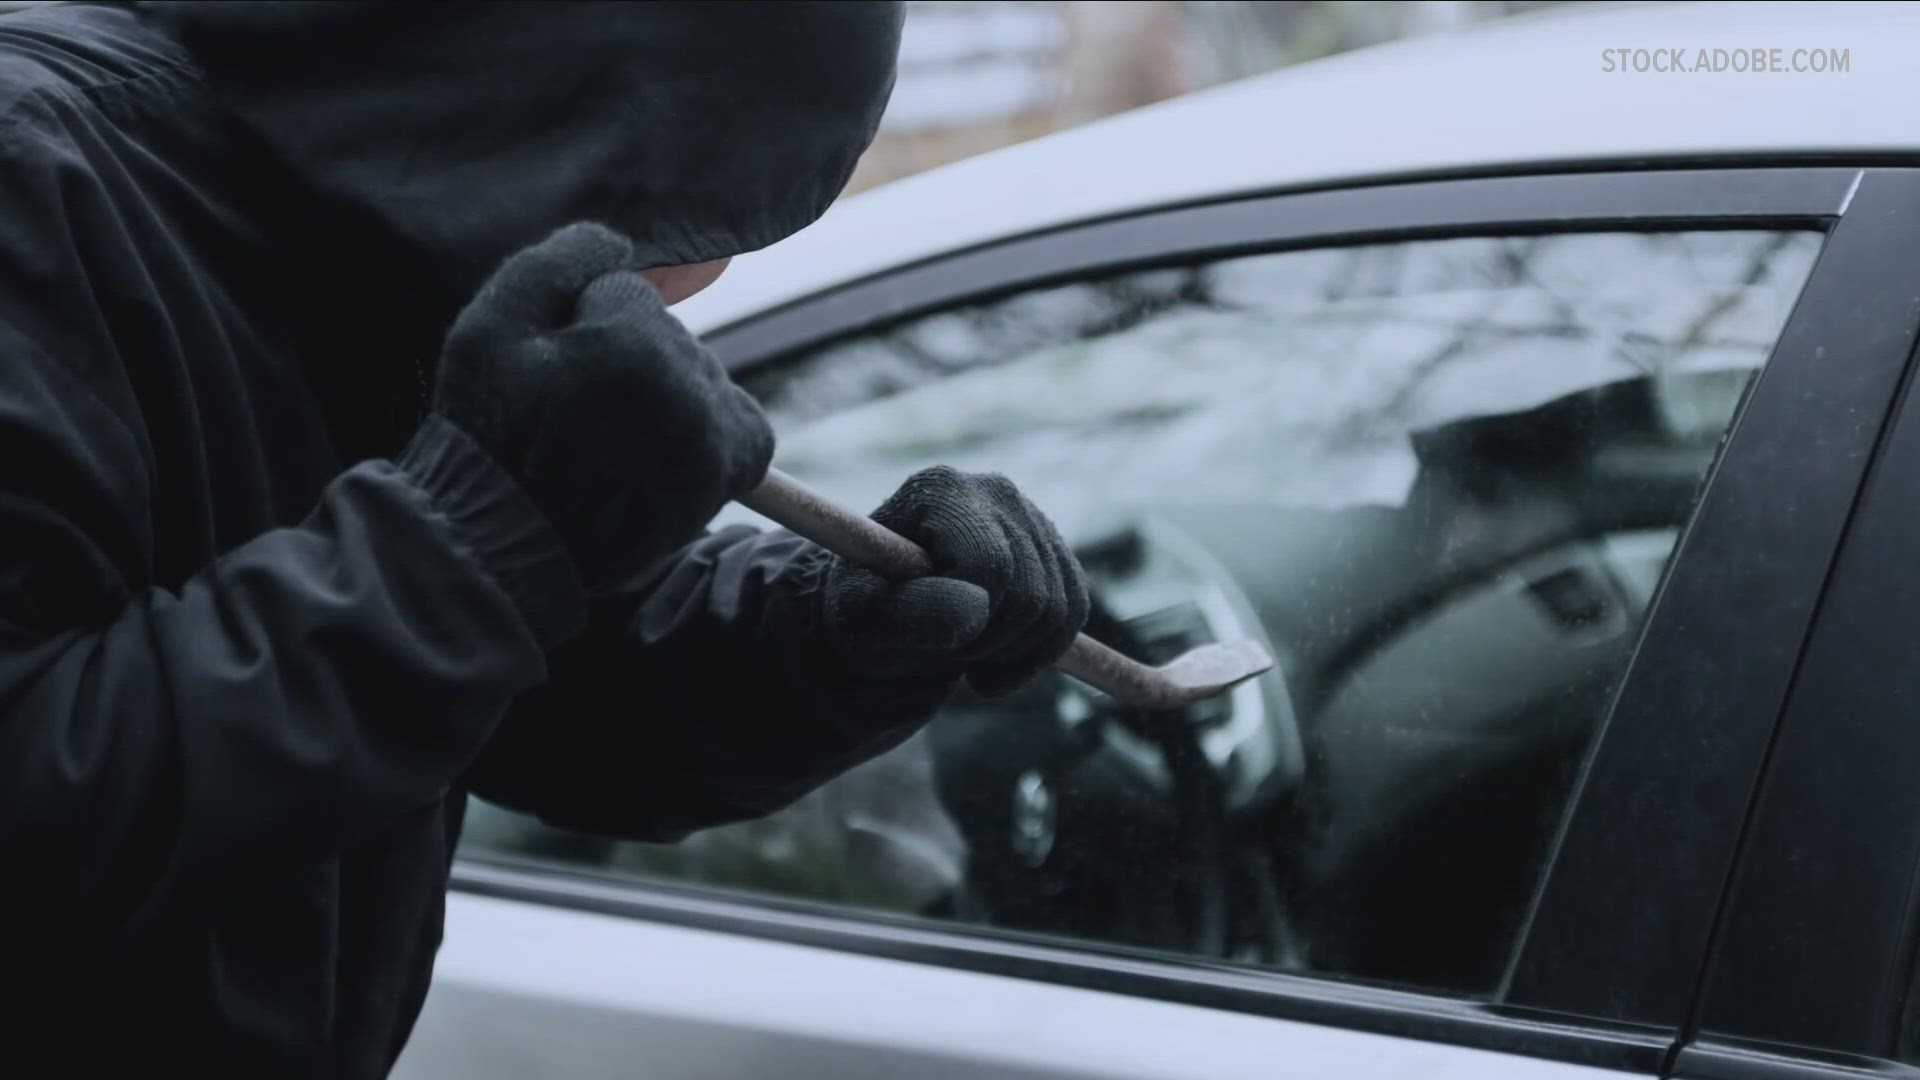 NY Governor Kathy Hochul unveiled a plan to help combat car thefts in WNY.